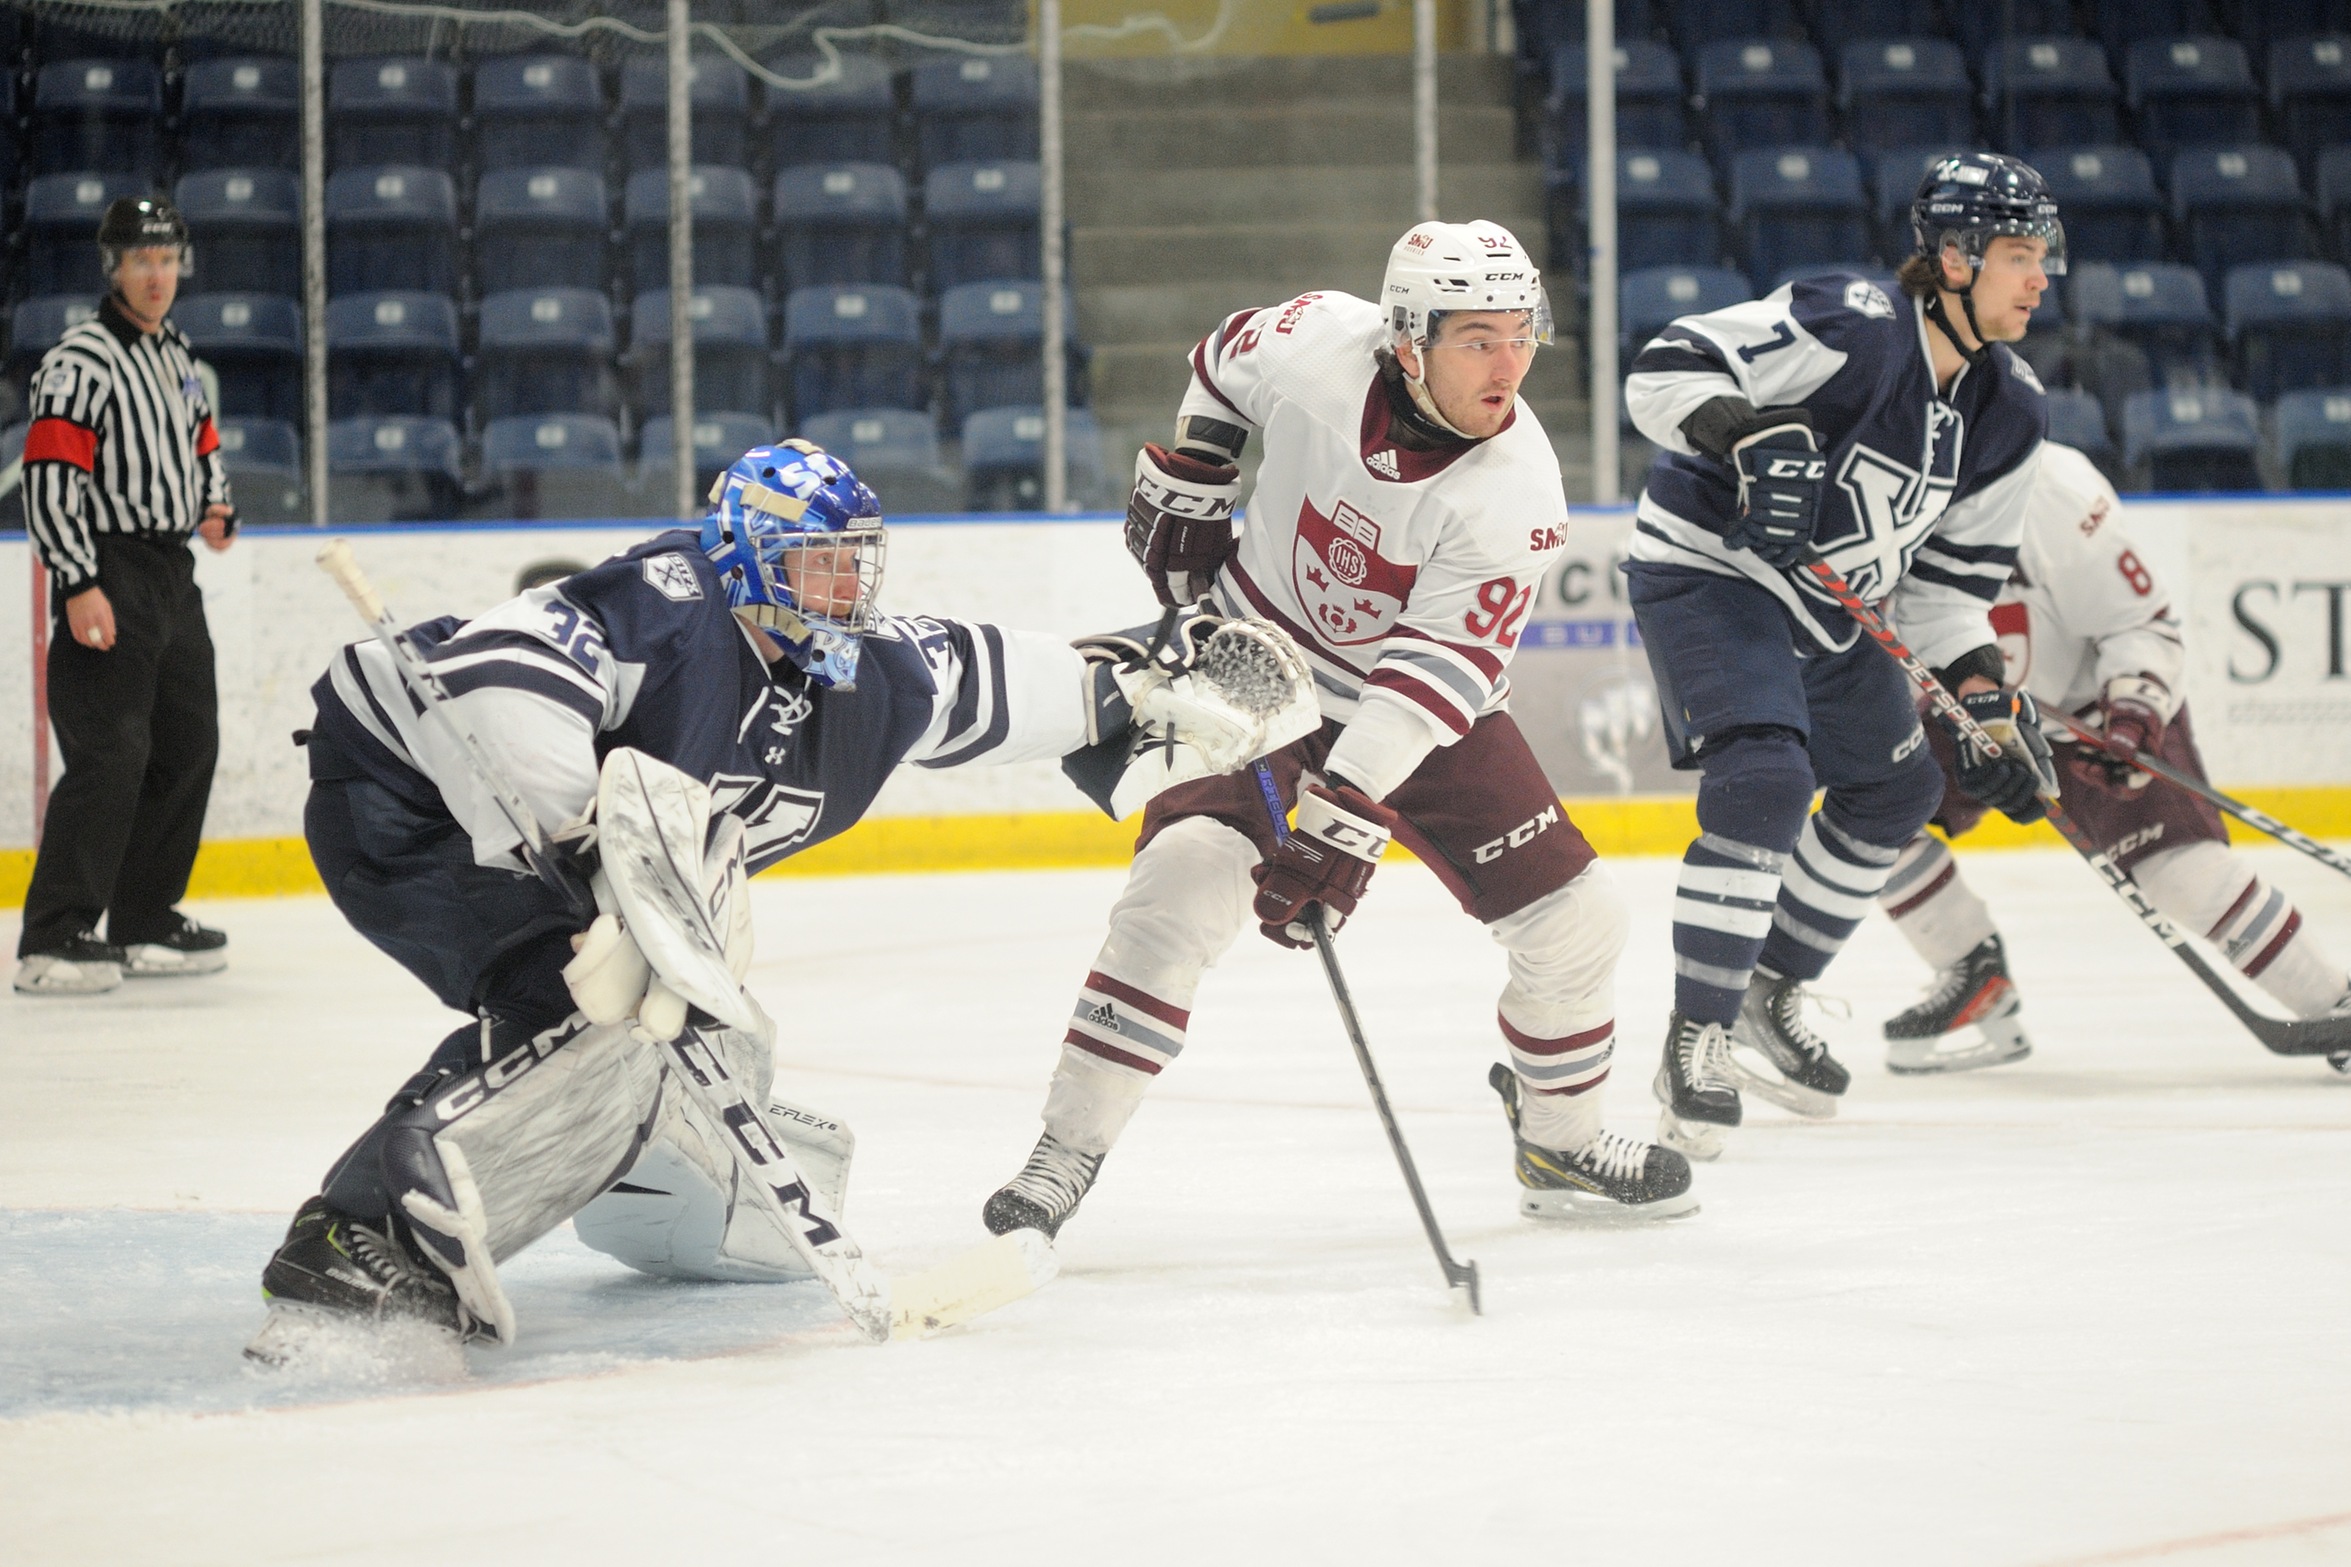 Huskies defeat X-Men 3-1 to move into third place in AUS standings